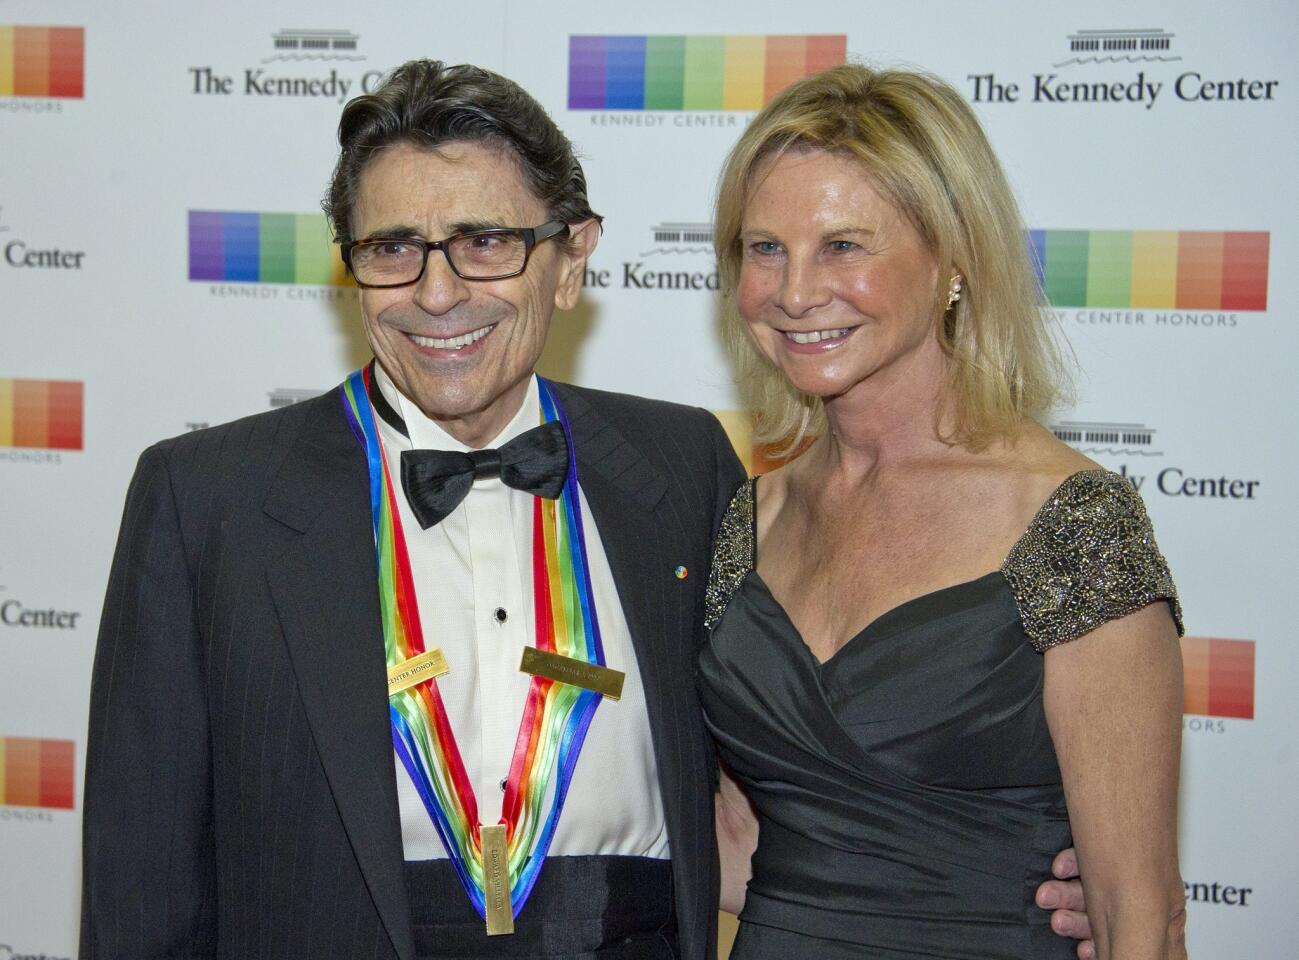 Kennedy Center Honors 2016